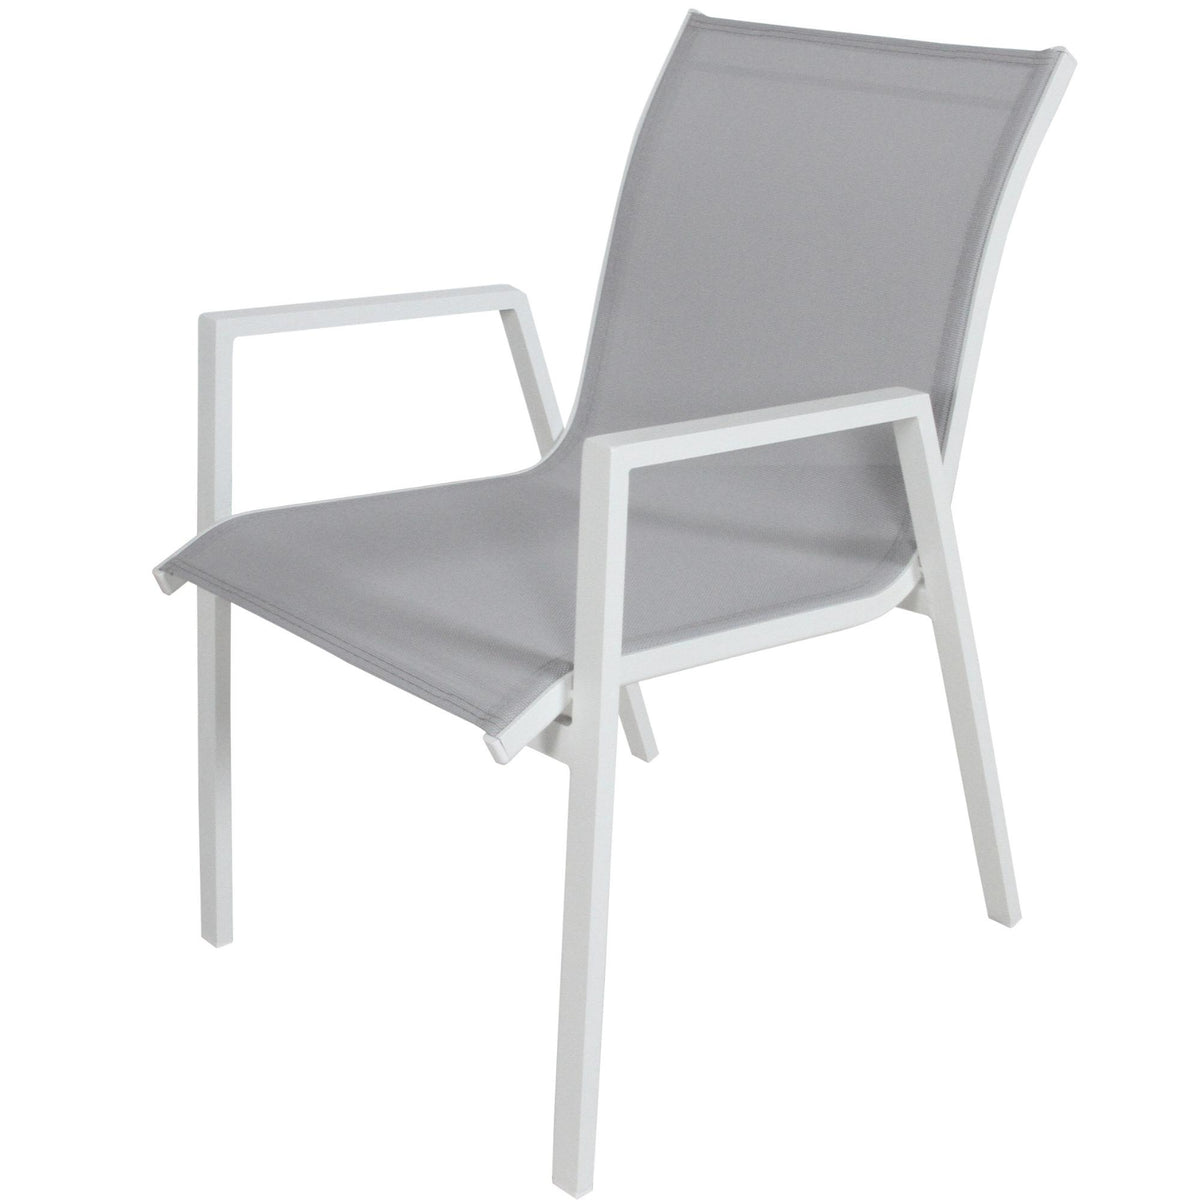 Iberia 7pc Outdoor Dining Table Chair Set White 